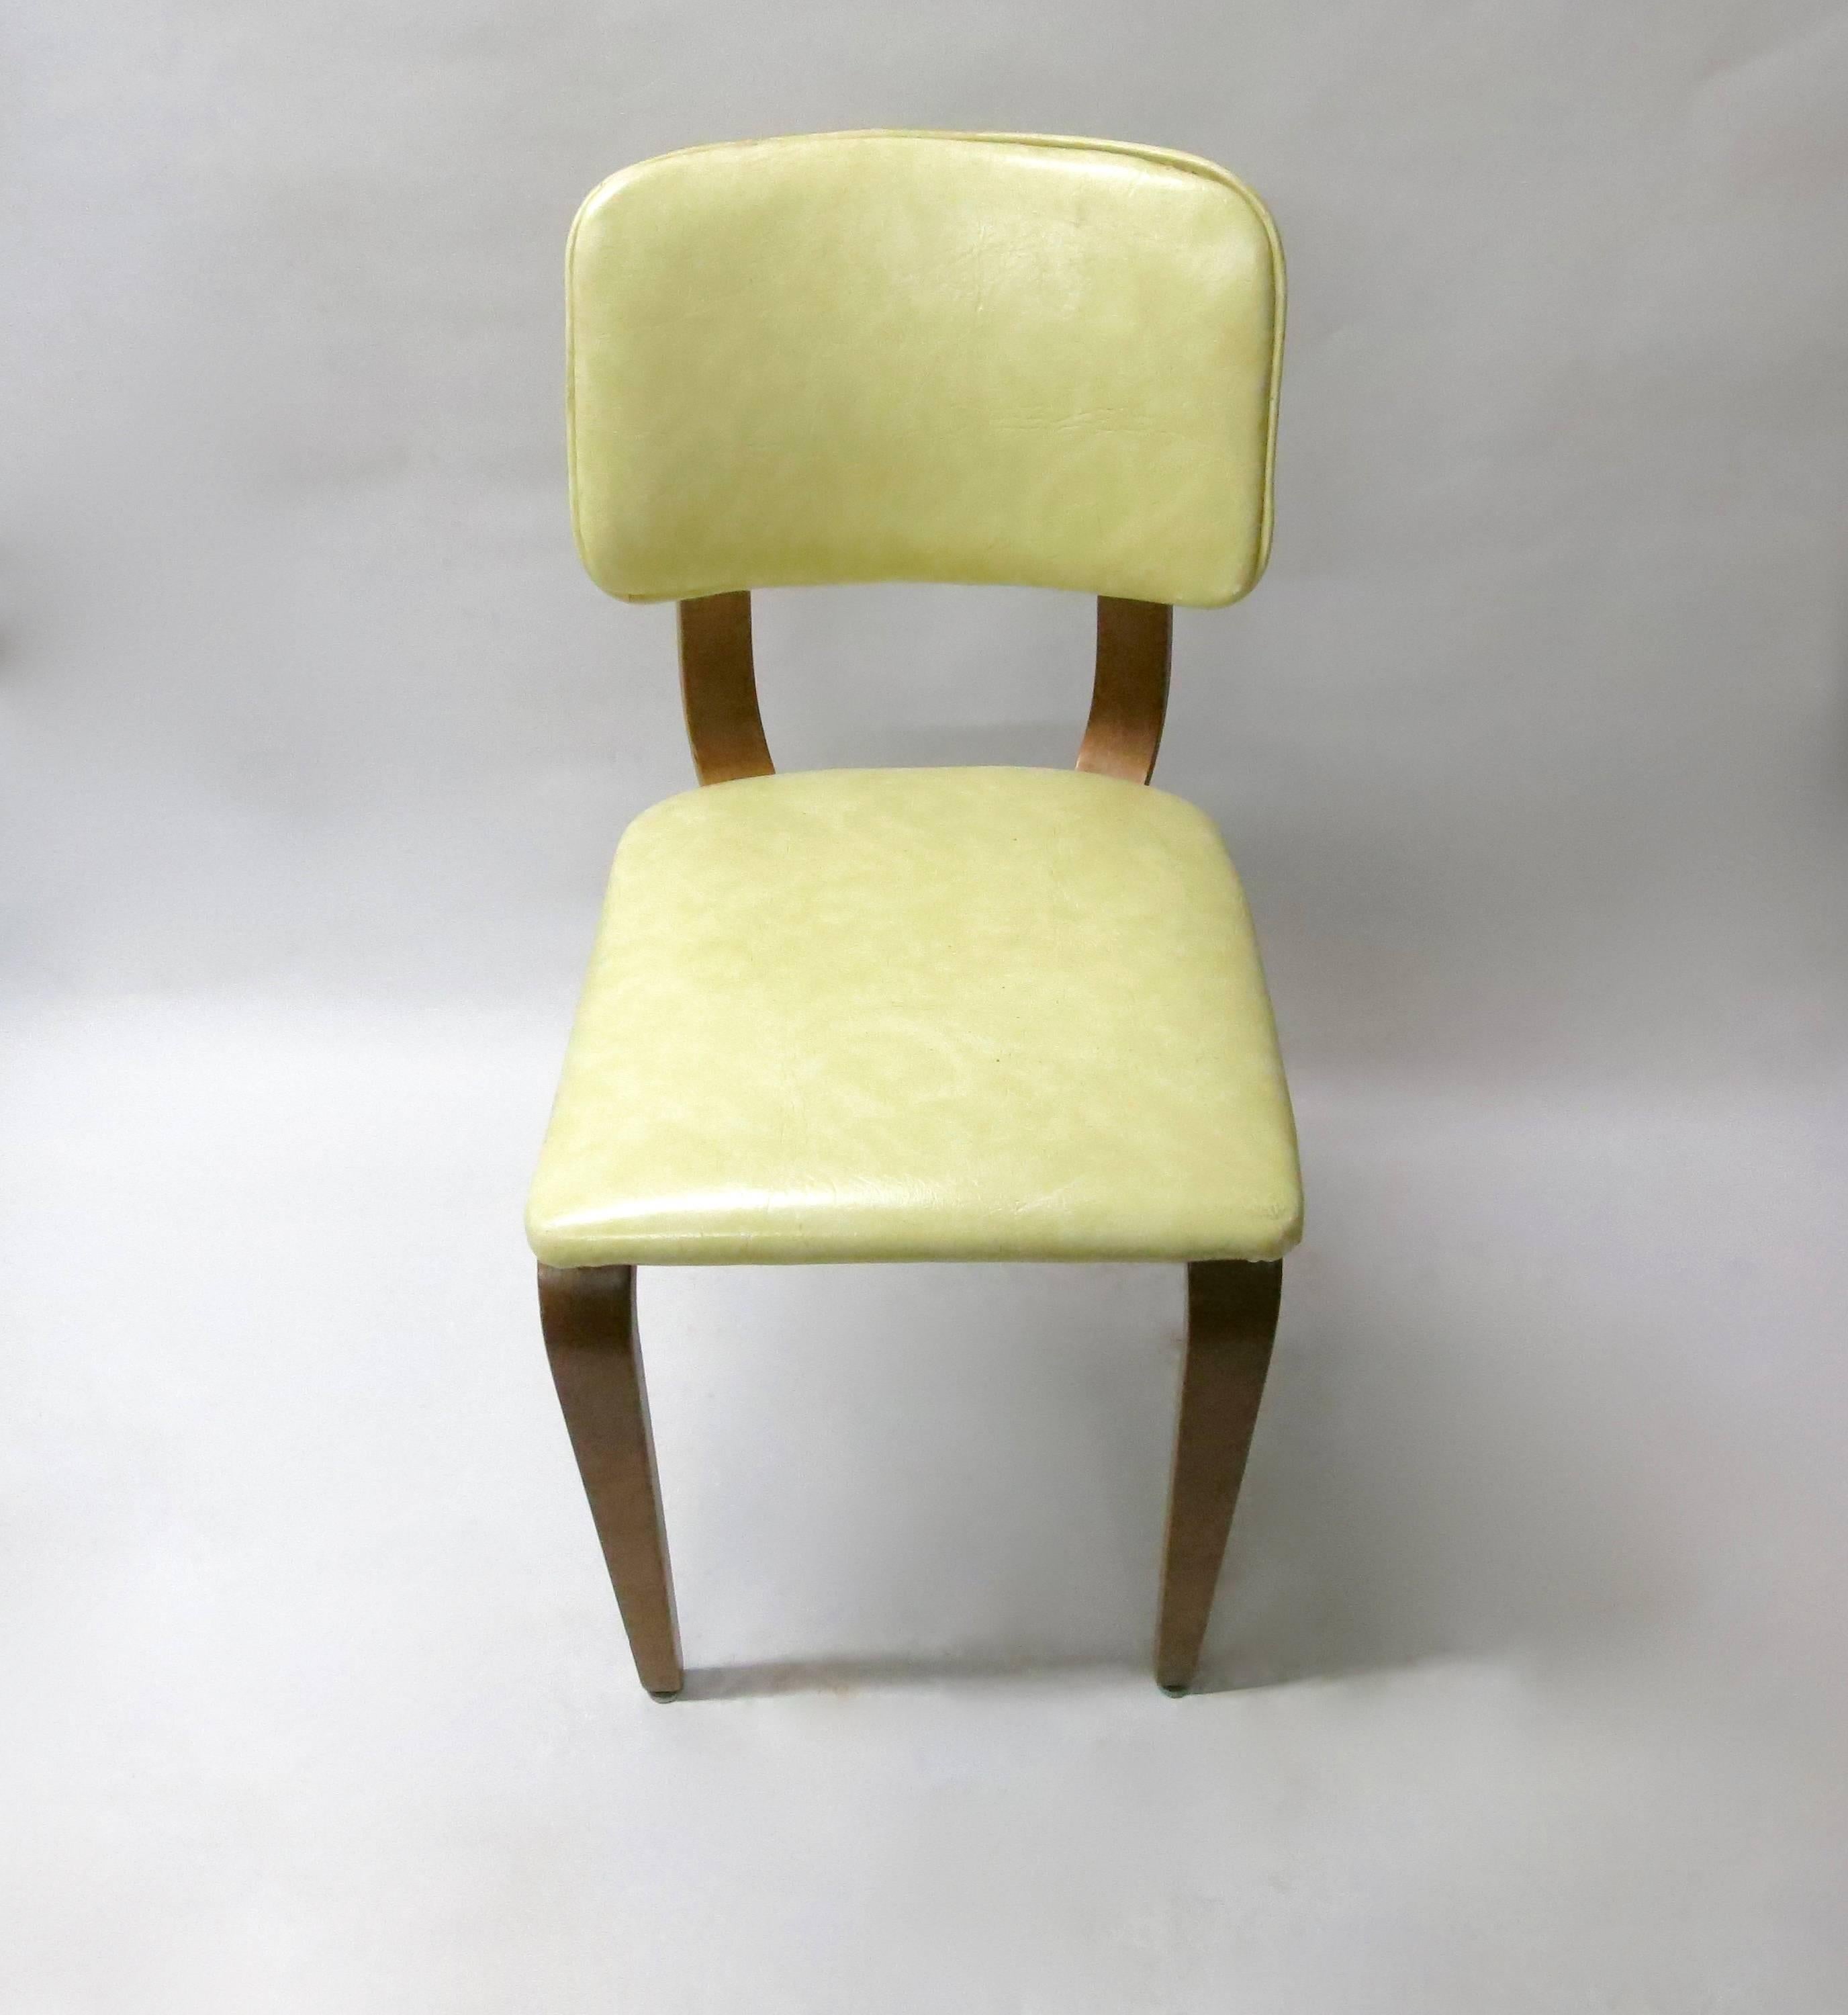 16 dining chairs in original very good condition. Still have Thonet labels underneath. The bentwood chairs are all structurally in great condition. The seat and back have vintage vinyl that came with the set.